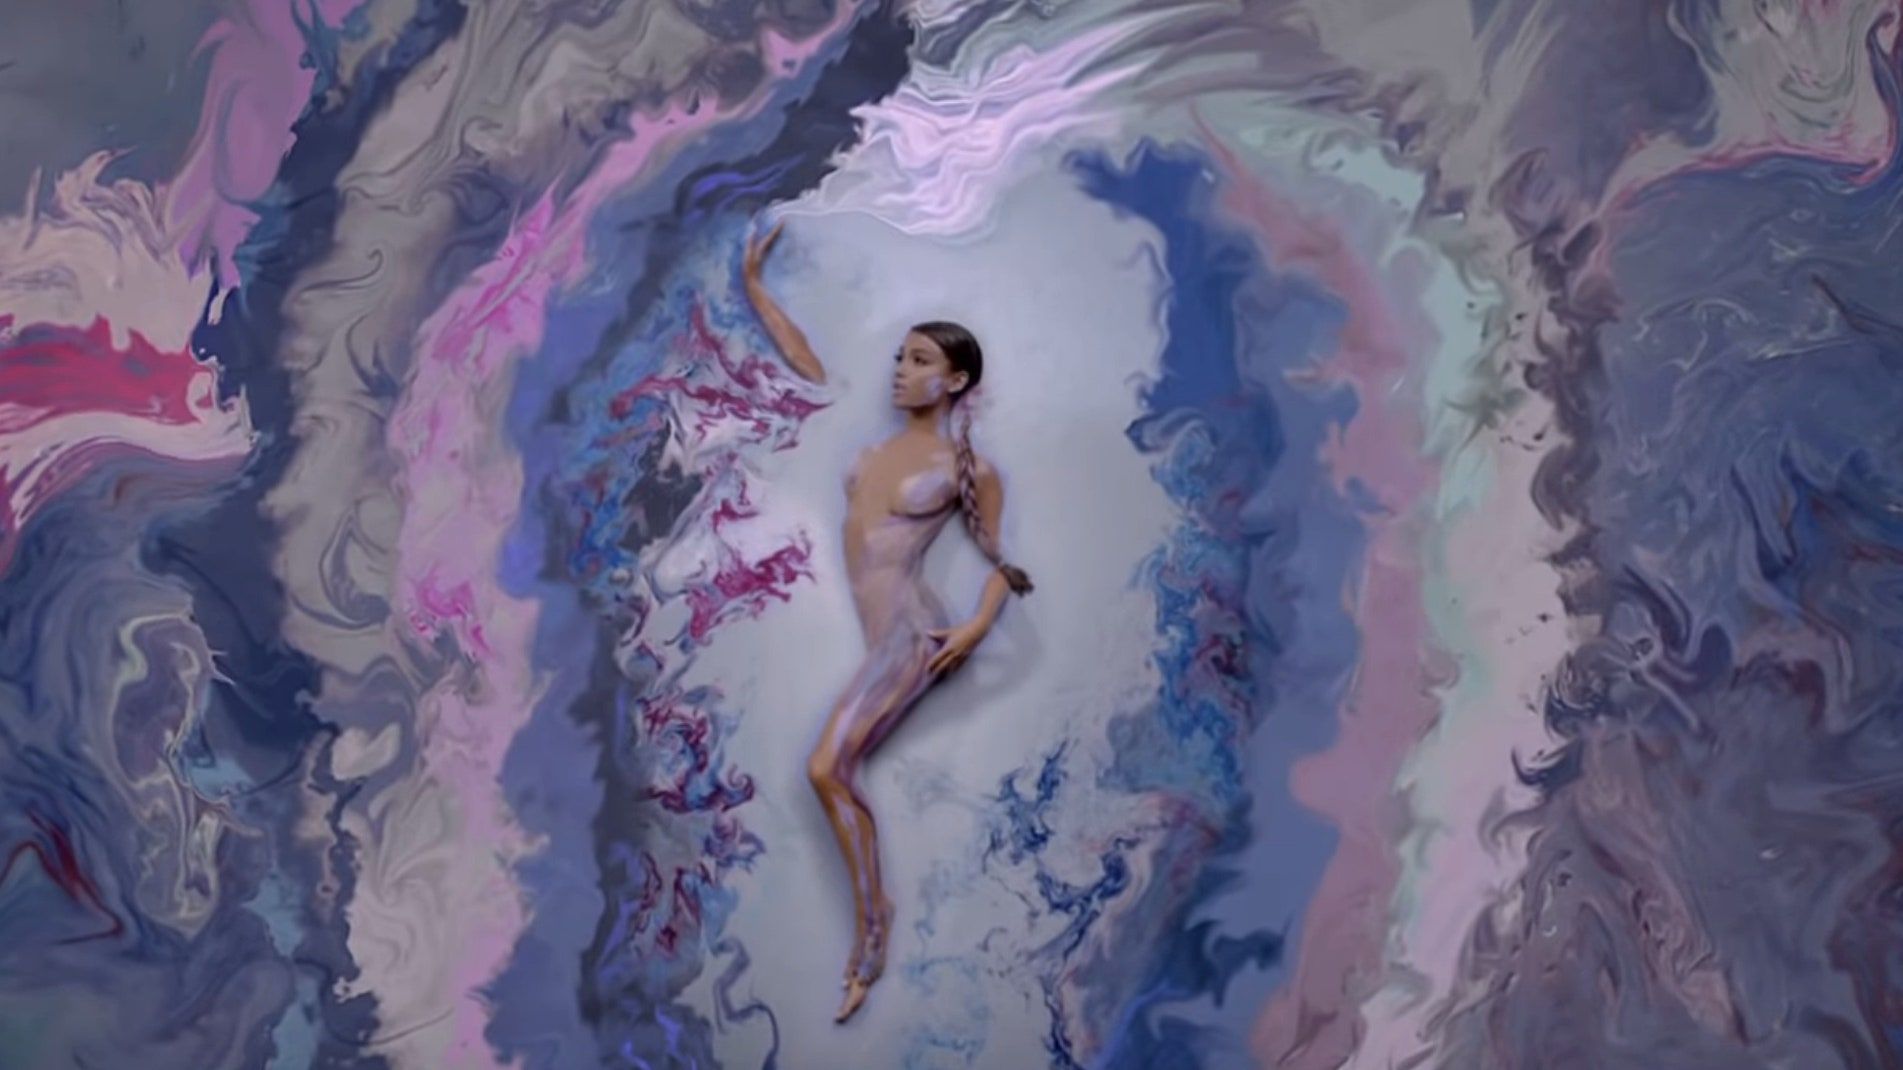 Ariana Grande's 'God Is a Woman' Video Is an Incredible Manifesto